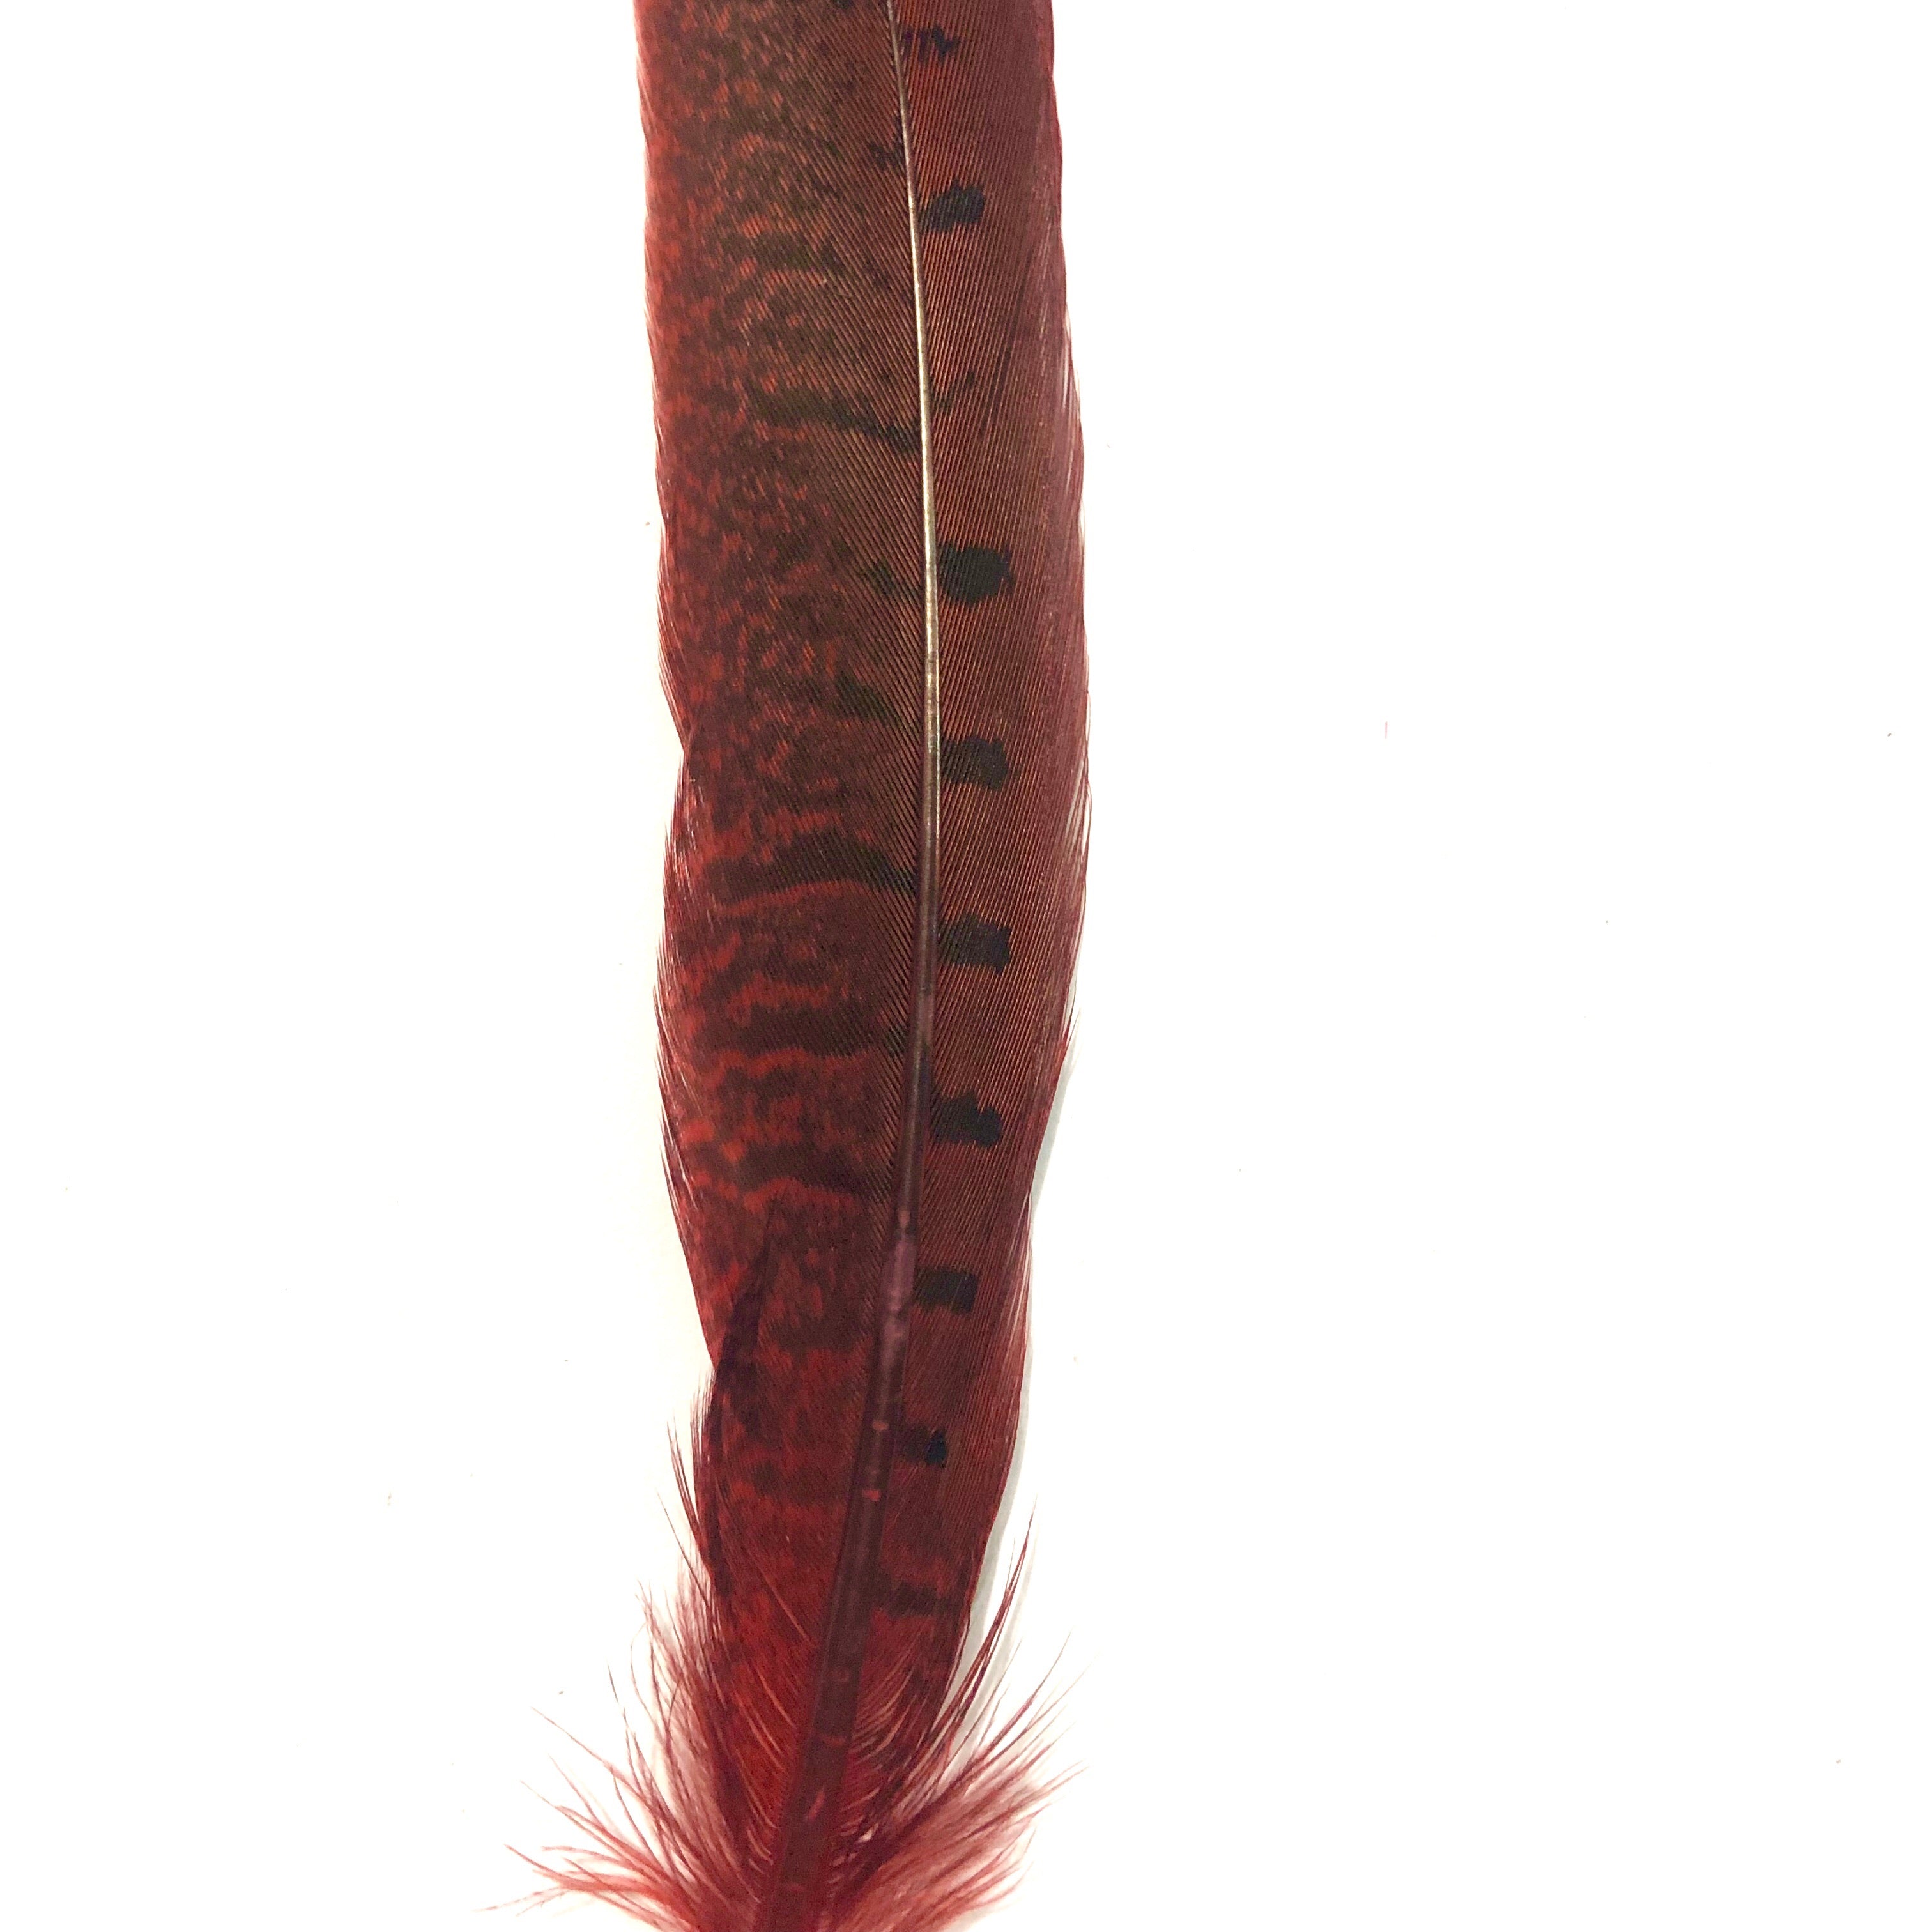 6" to 10" Ringneck Pheasant Tail Feather x 10 pcs - Red